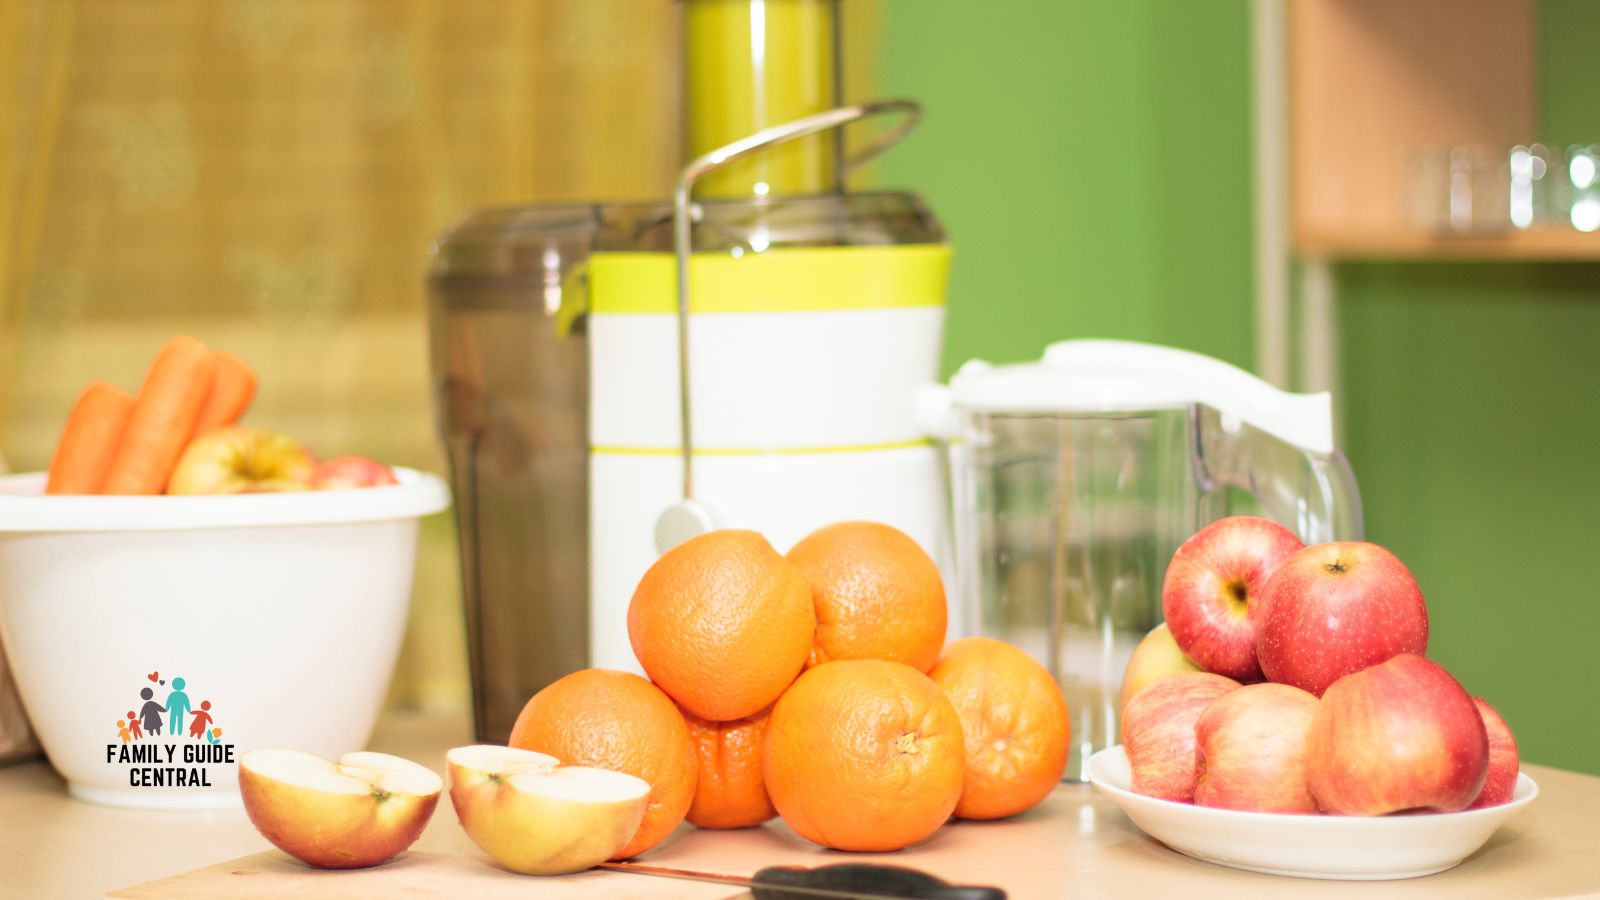 Centrifugal juicer with oranges apples carrots in front - familyguidecentral.com